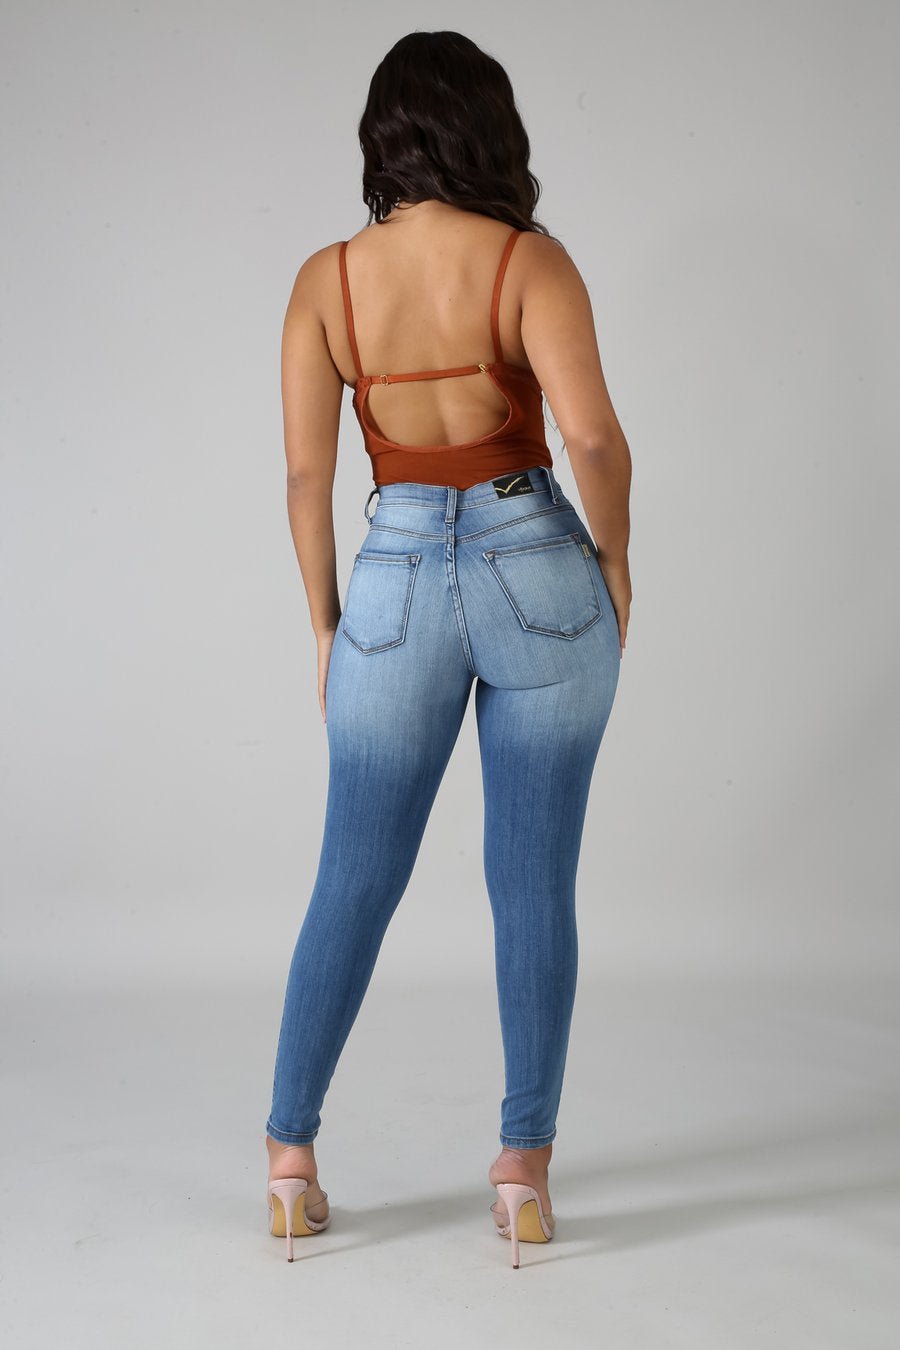 Must Have Distressed Skinny Jeans Medium Wash - Ali’s Couture 